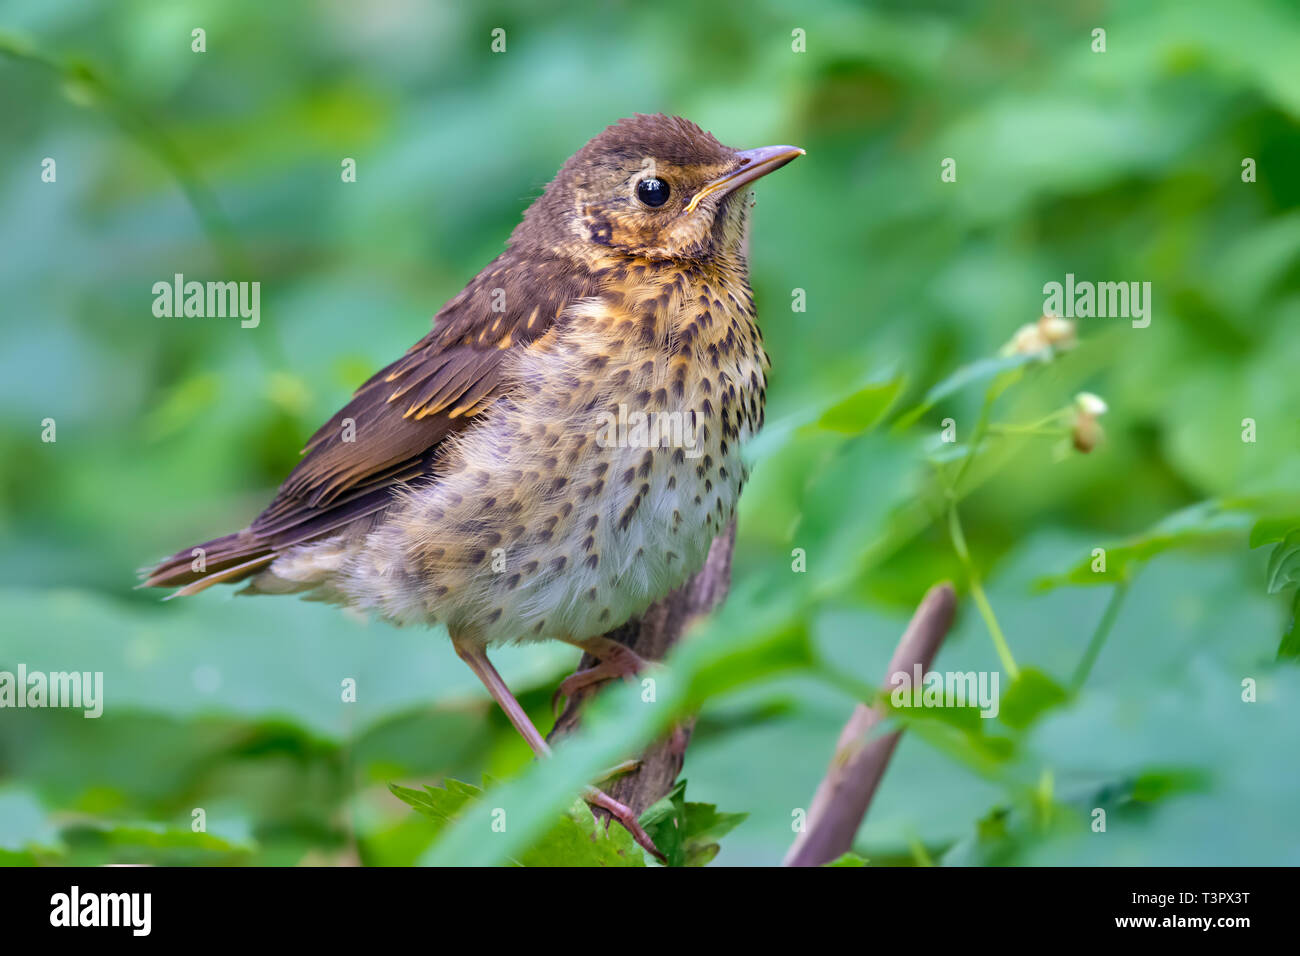 Very young Song Thrush posing and looks through green foliage Stock Photo